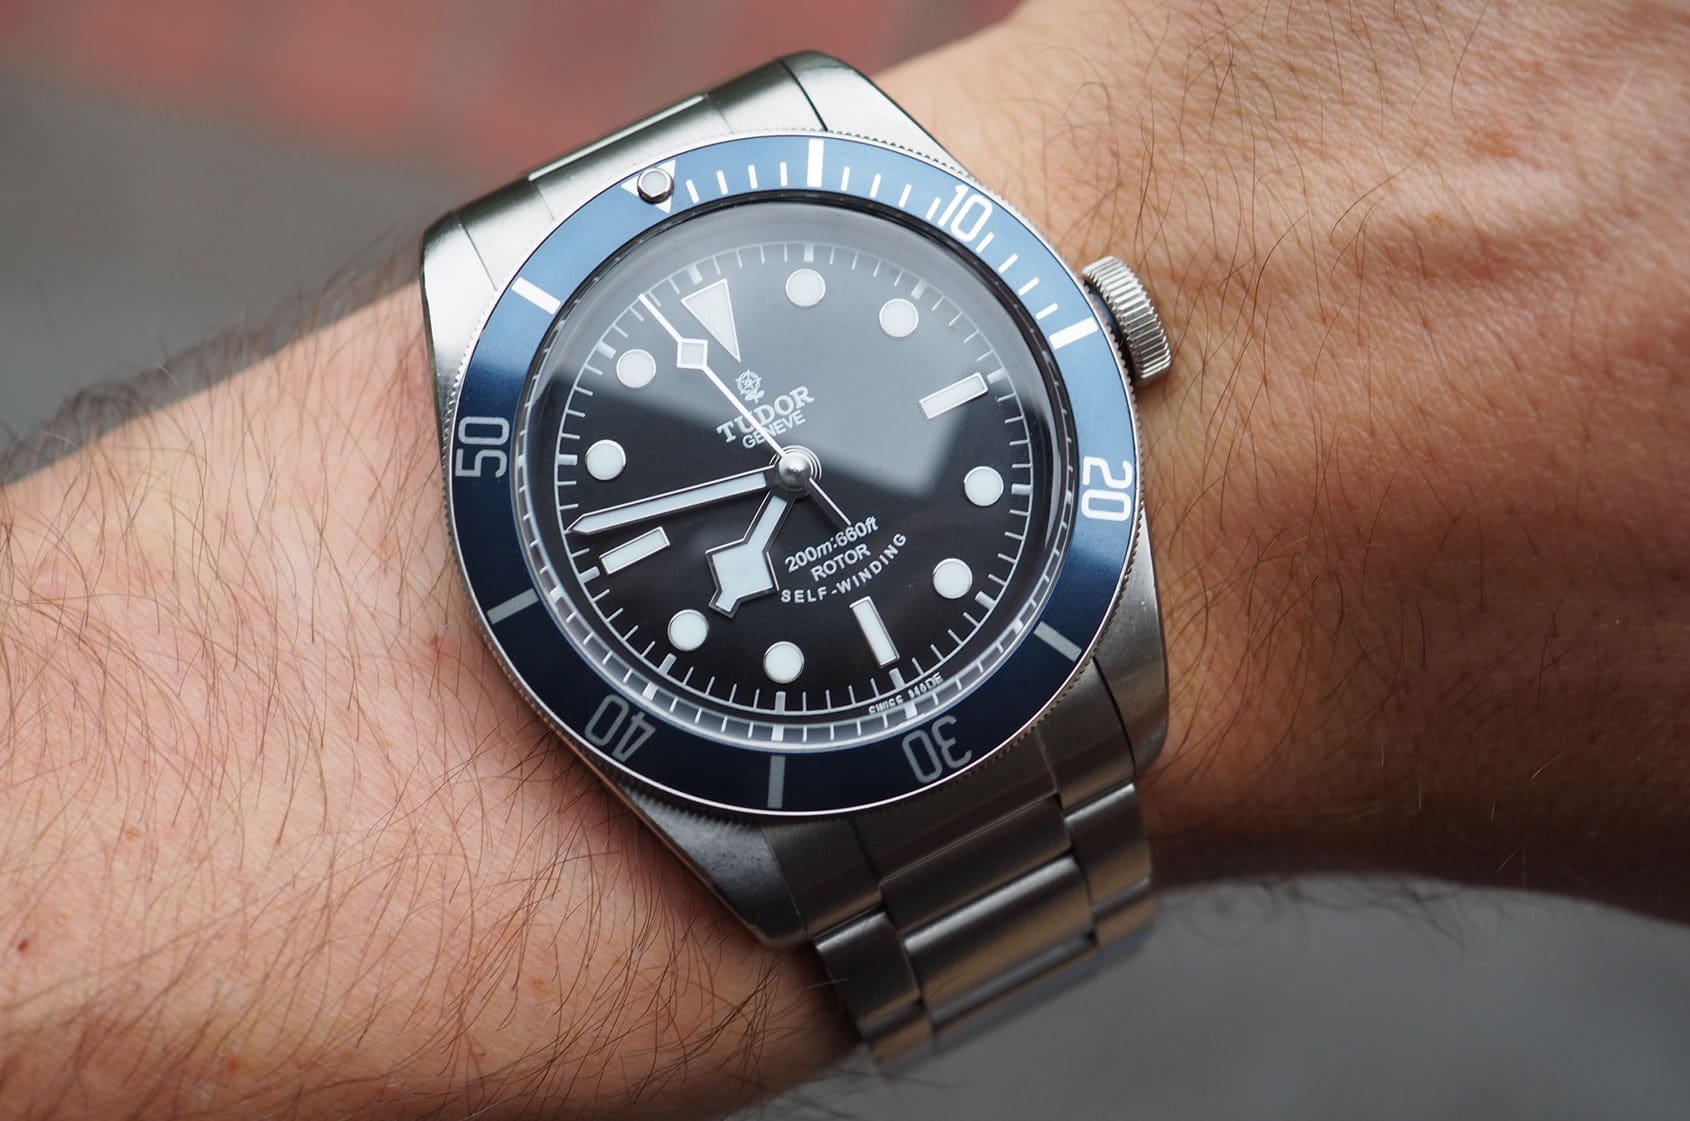 Celebrating Seiko’s NH35 movement – the unsung hero used by top microbrands in everything from indestructible divers to vintage stunners